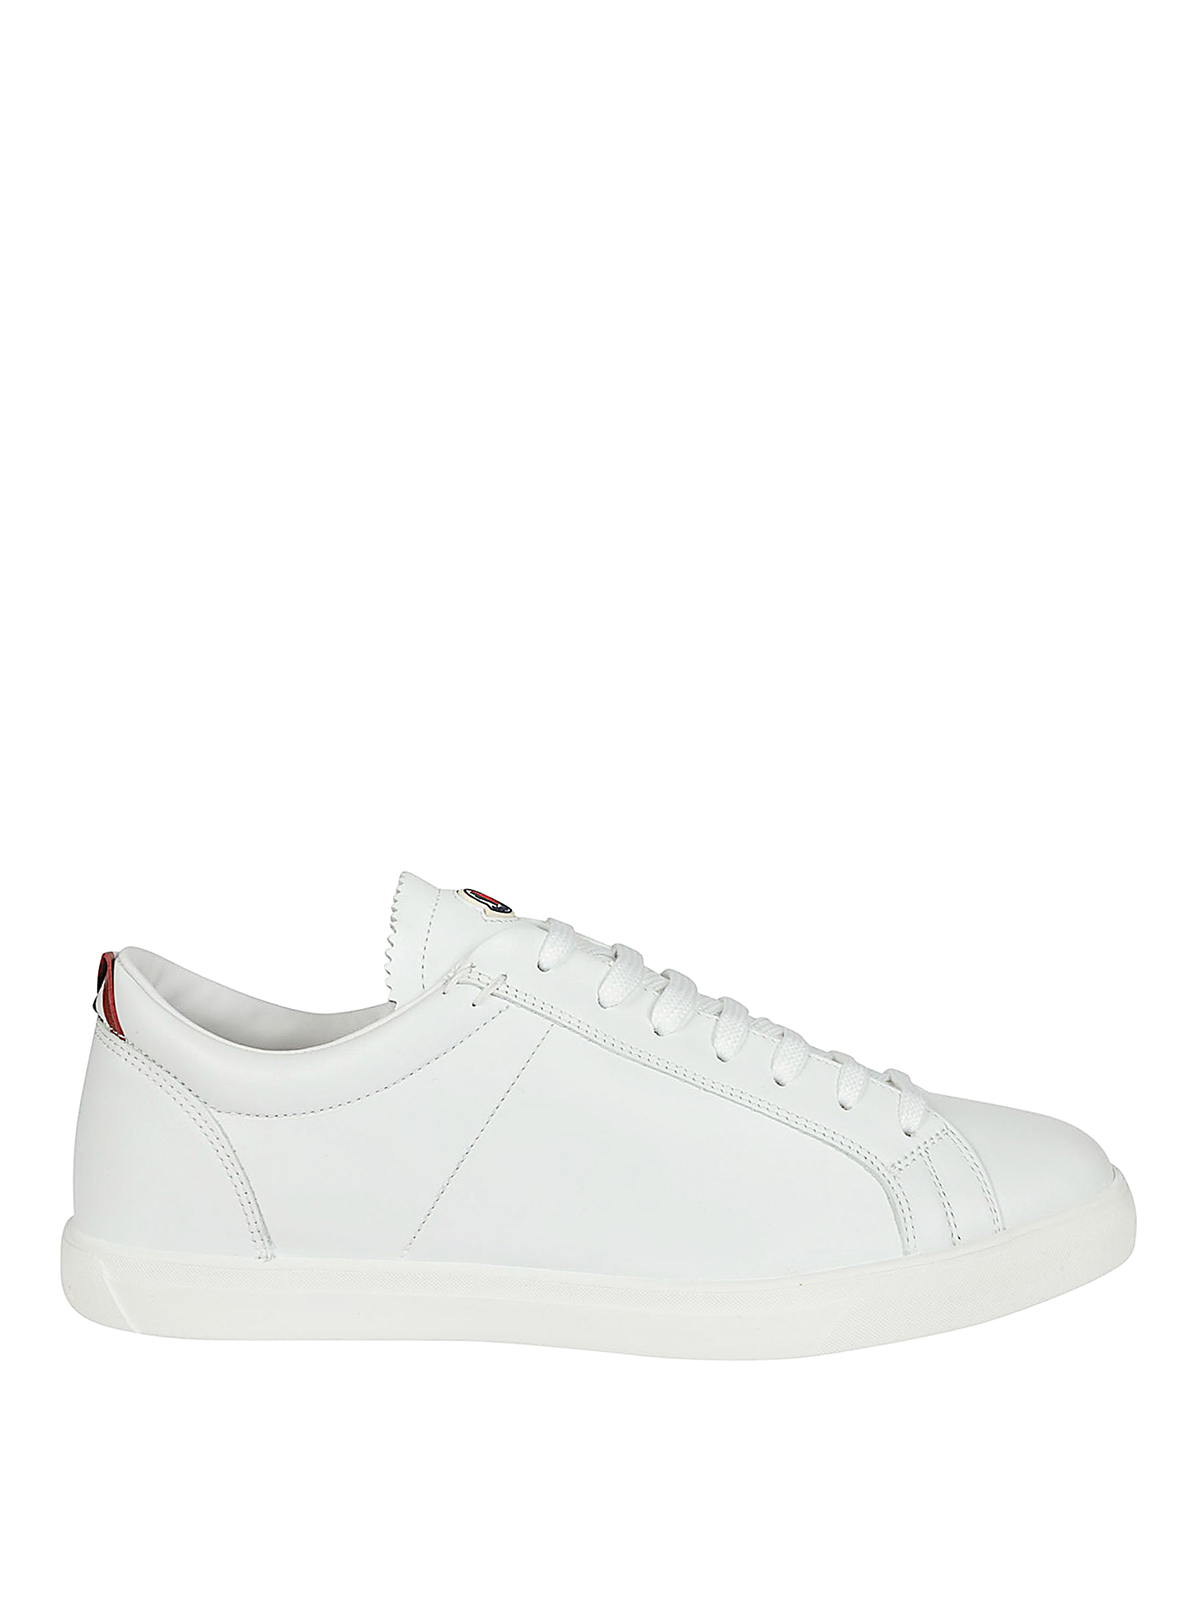 Trainers Moncler - White leather sneakers - 1017400019MT001 | iKRIX.com